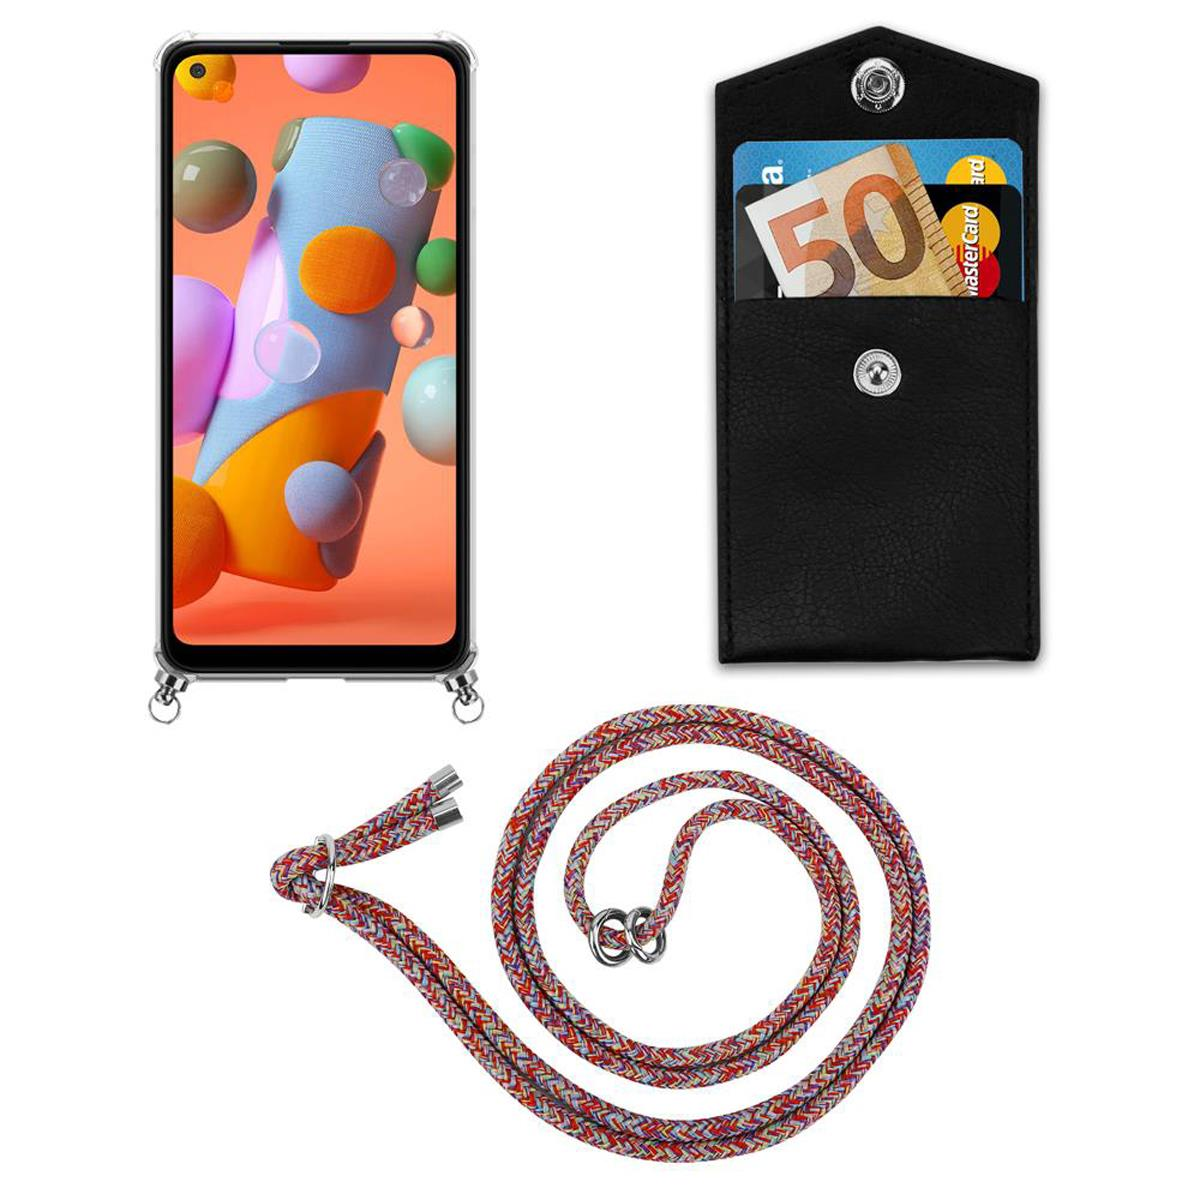 M11, Ringen, Backcover, Samsung, PARROT Silber Galaxy A11 und Hülle, Handy mit CADORABO Kordel / Band abnehmbarer COLORFUL Kette